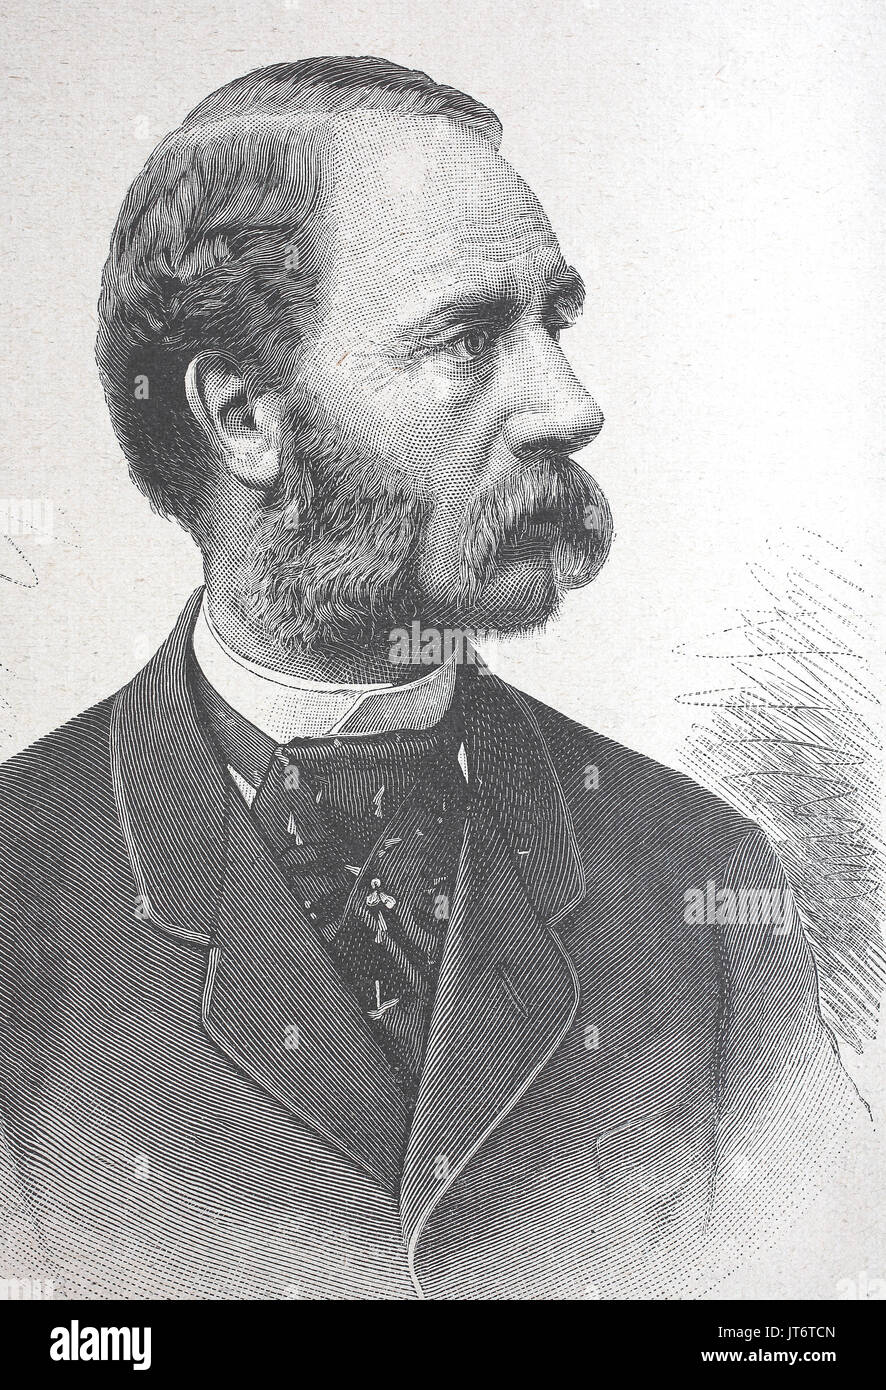 Christian IX , 1818 - 1906, was King of Denmark, Digital improved reproduction of an image published between 1880 - 1885 Stock Photo